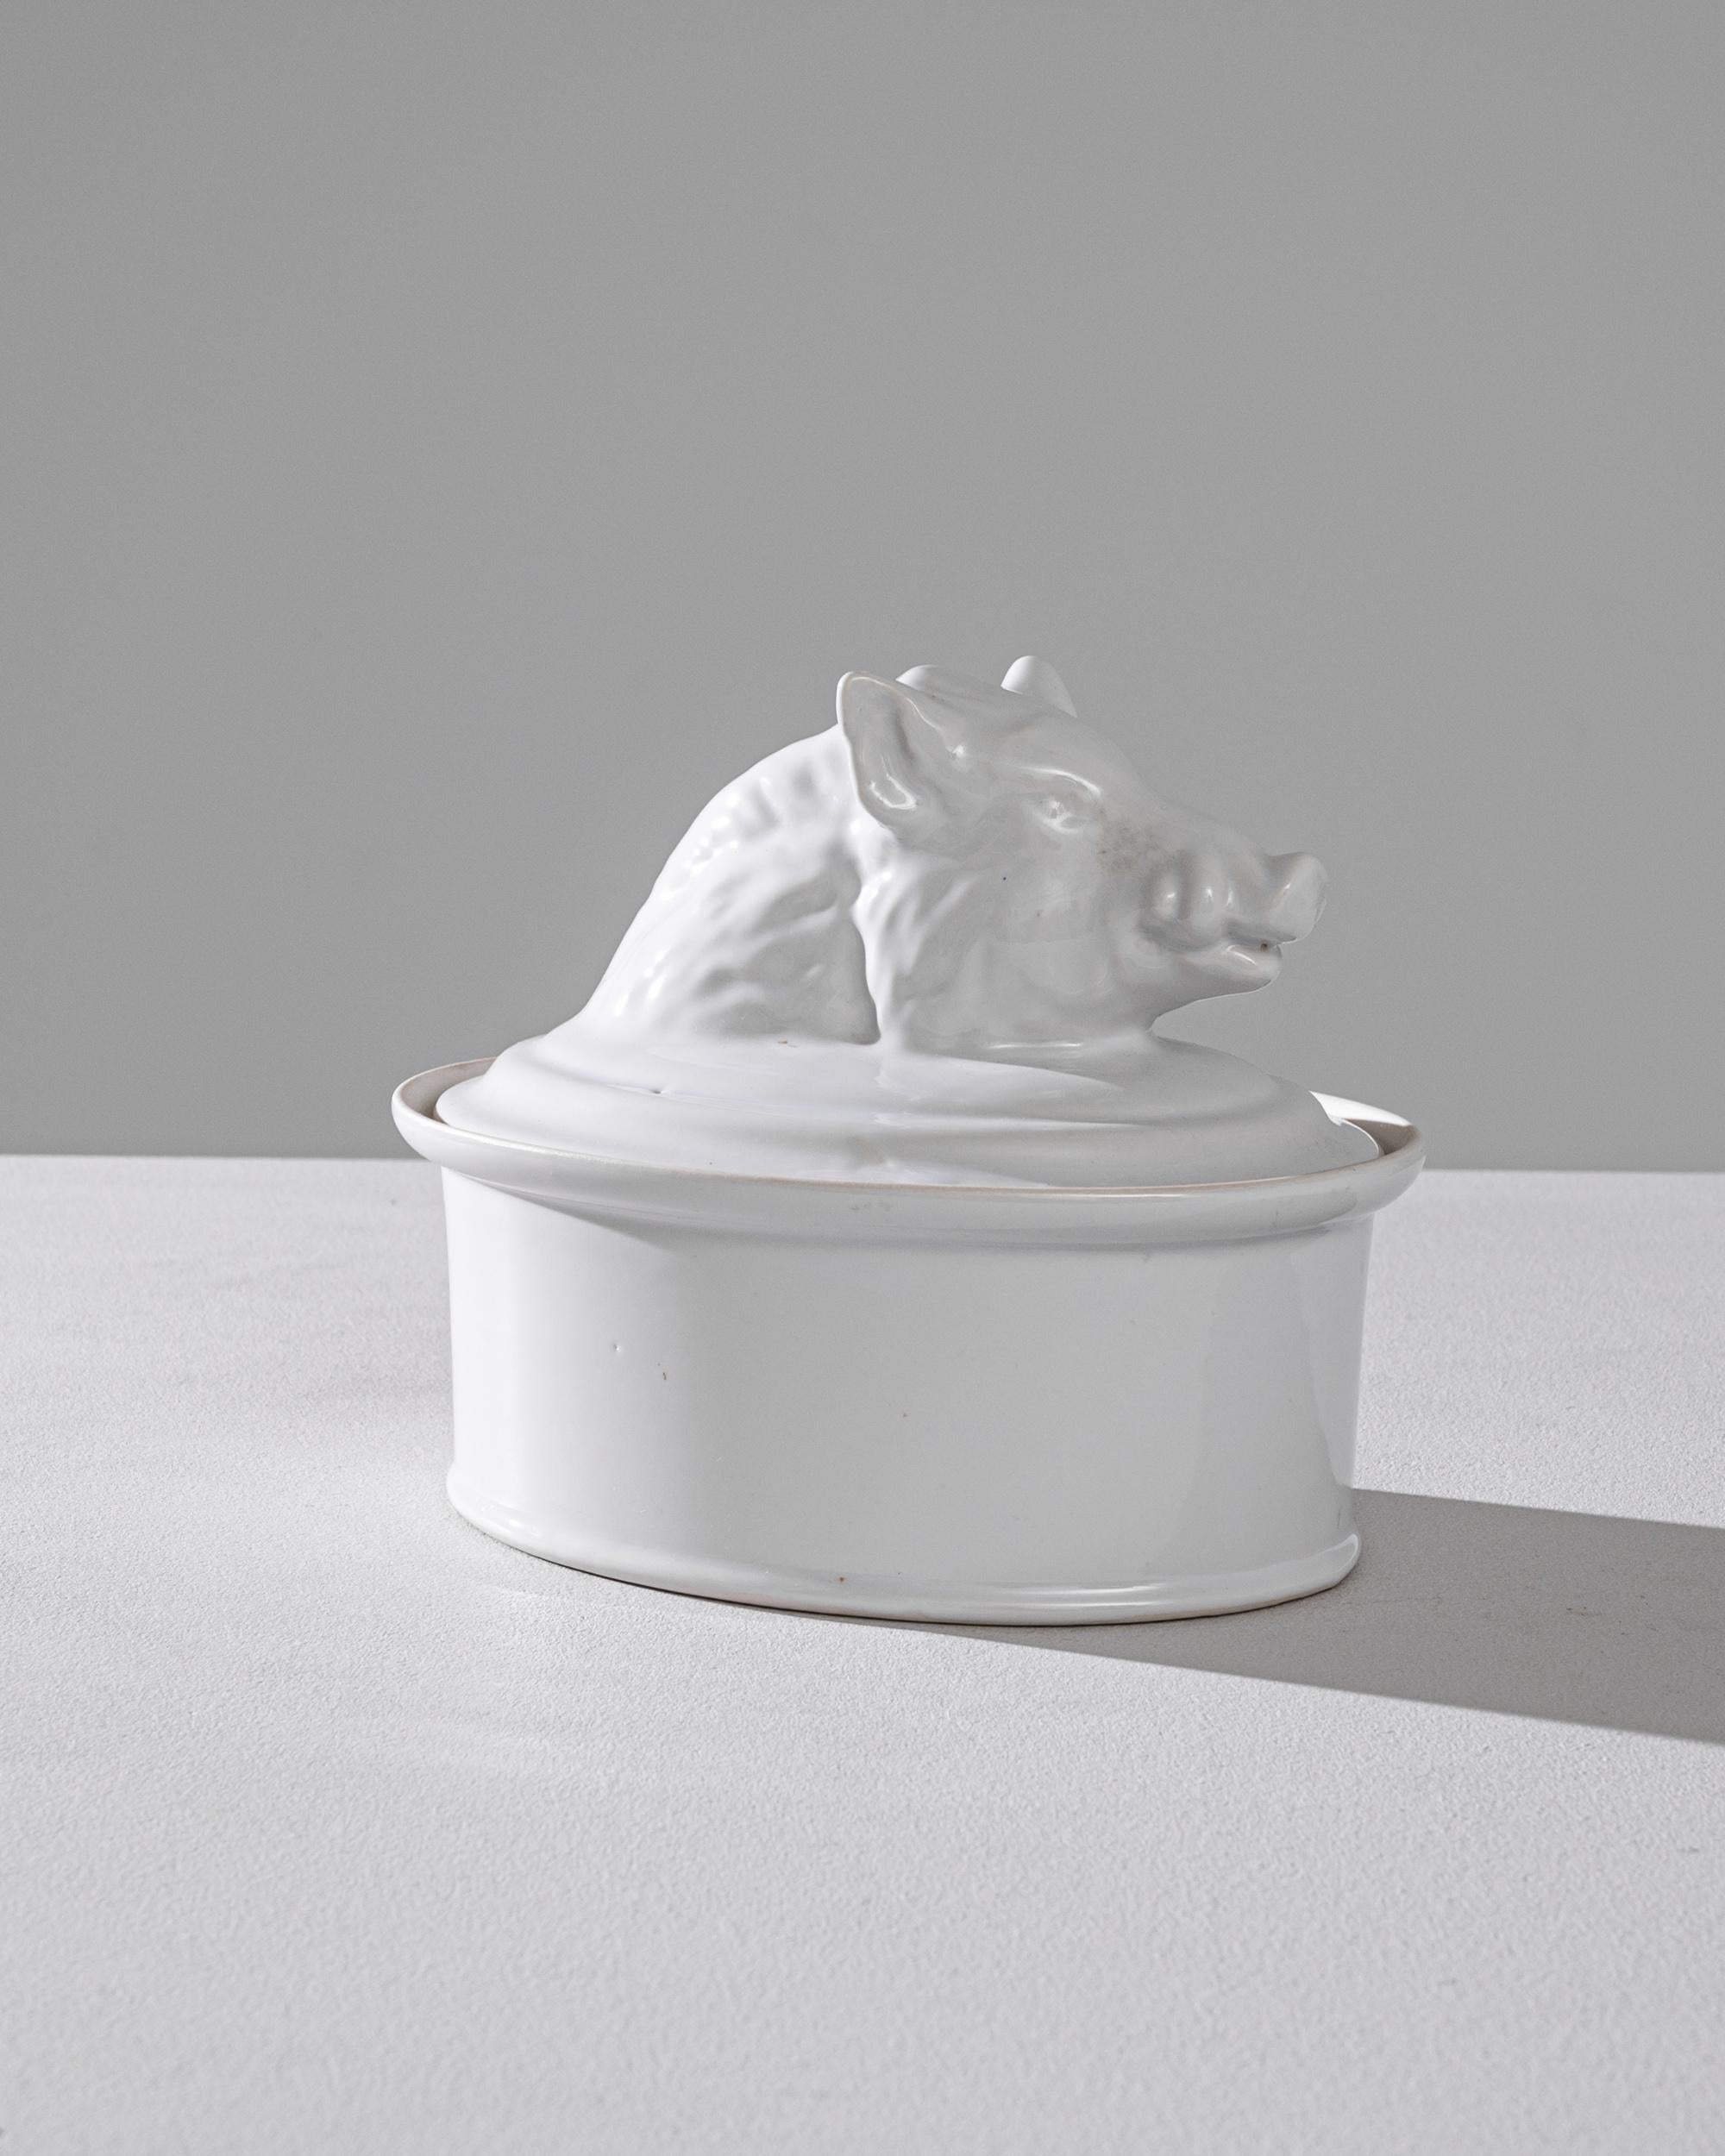 A porcelain tureen with lid from Belgium, produced circa 1900. An antique tureen with a clean unmarred surface like a new bar of soap, allowing, without distraction, the prominent wild boar bust that seems to emerge from the lid to take center stage.